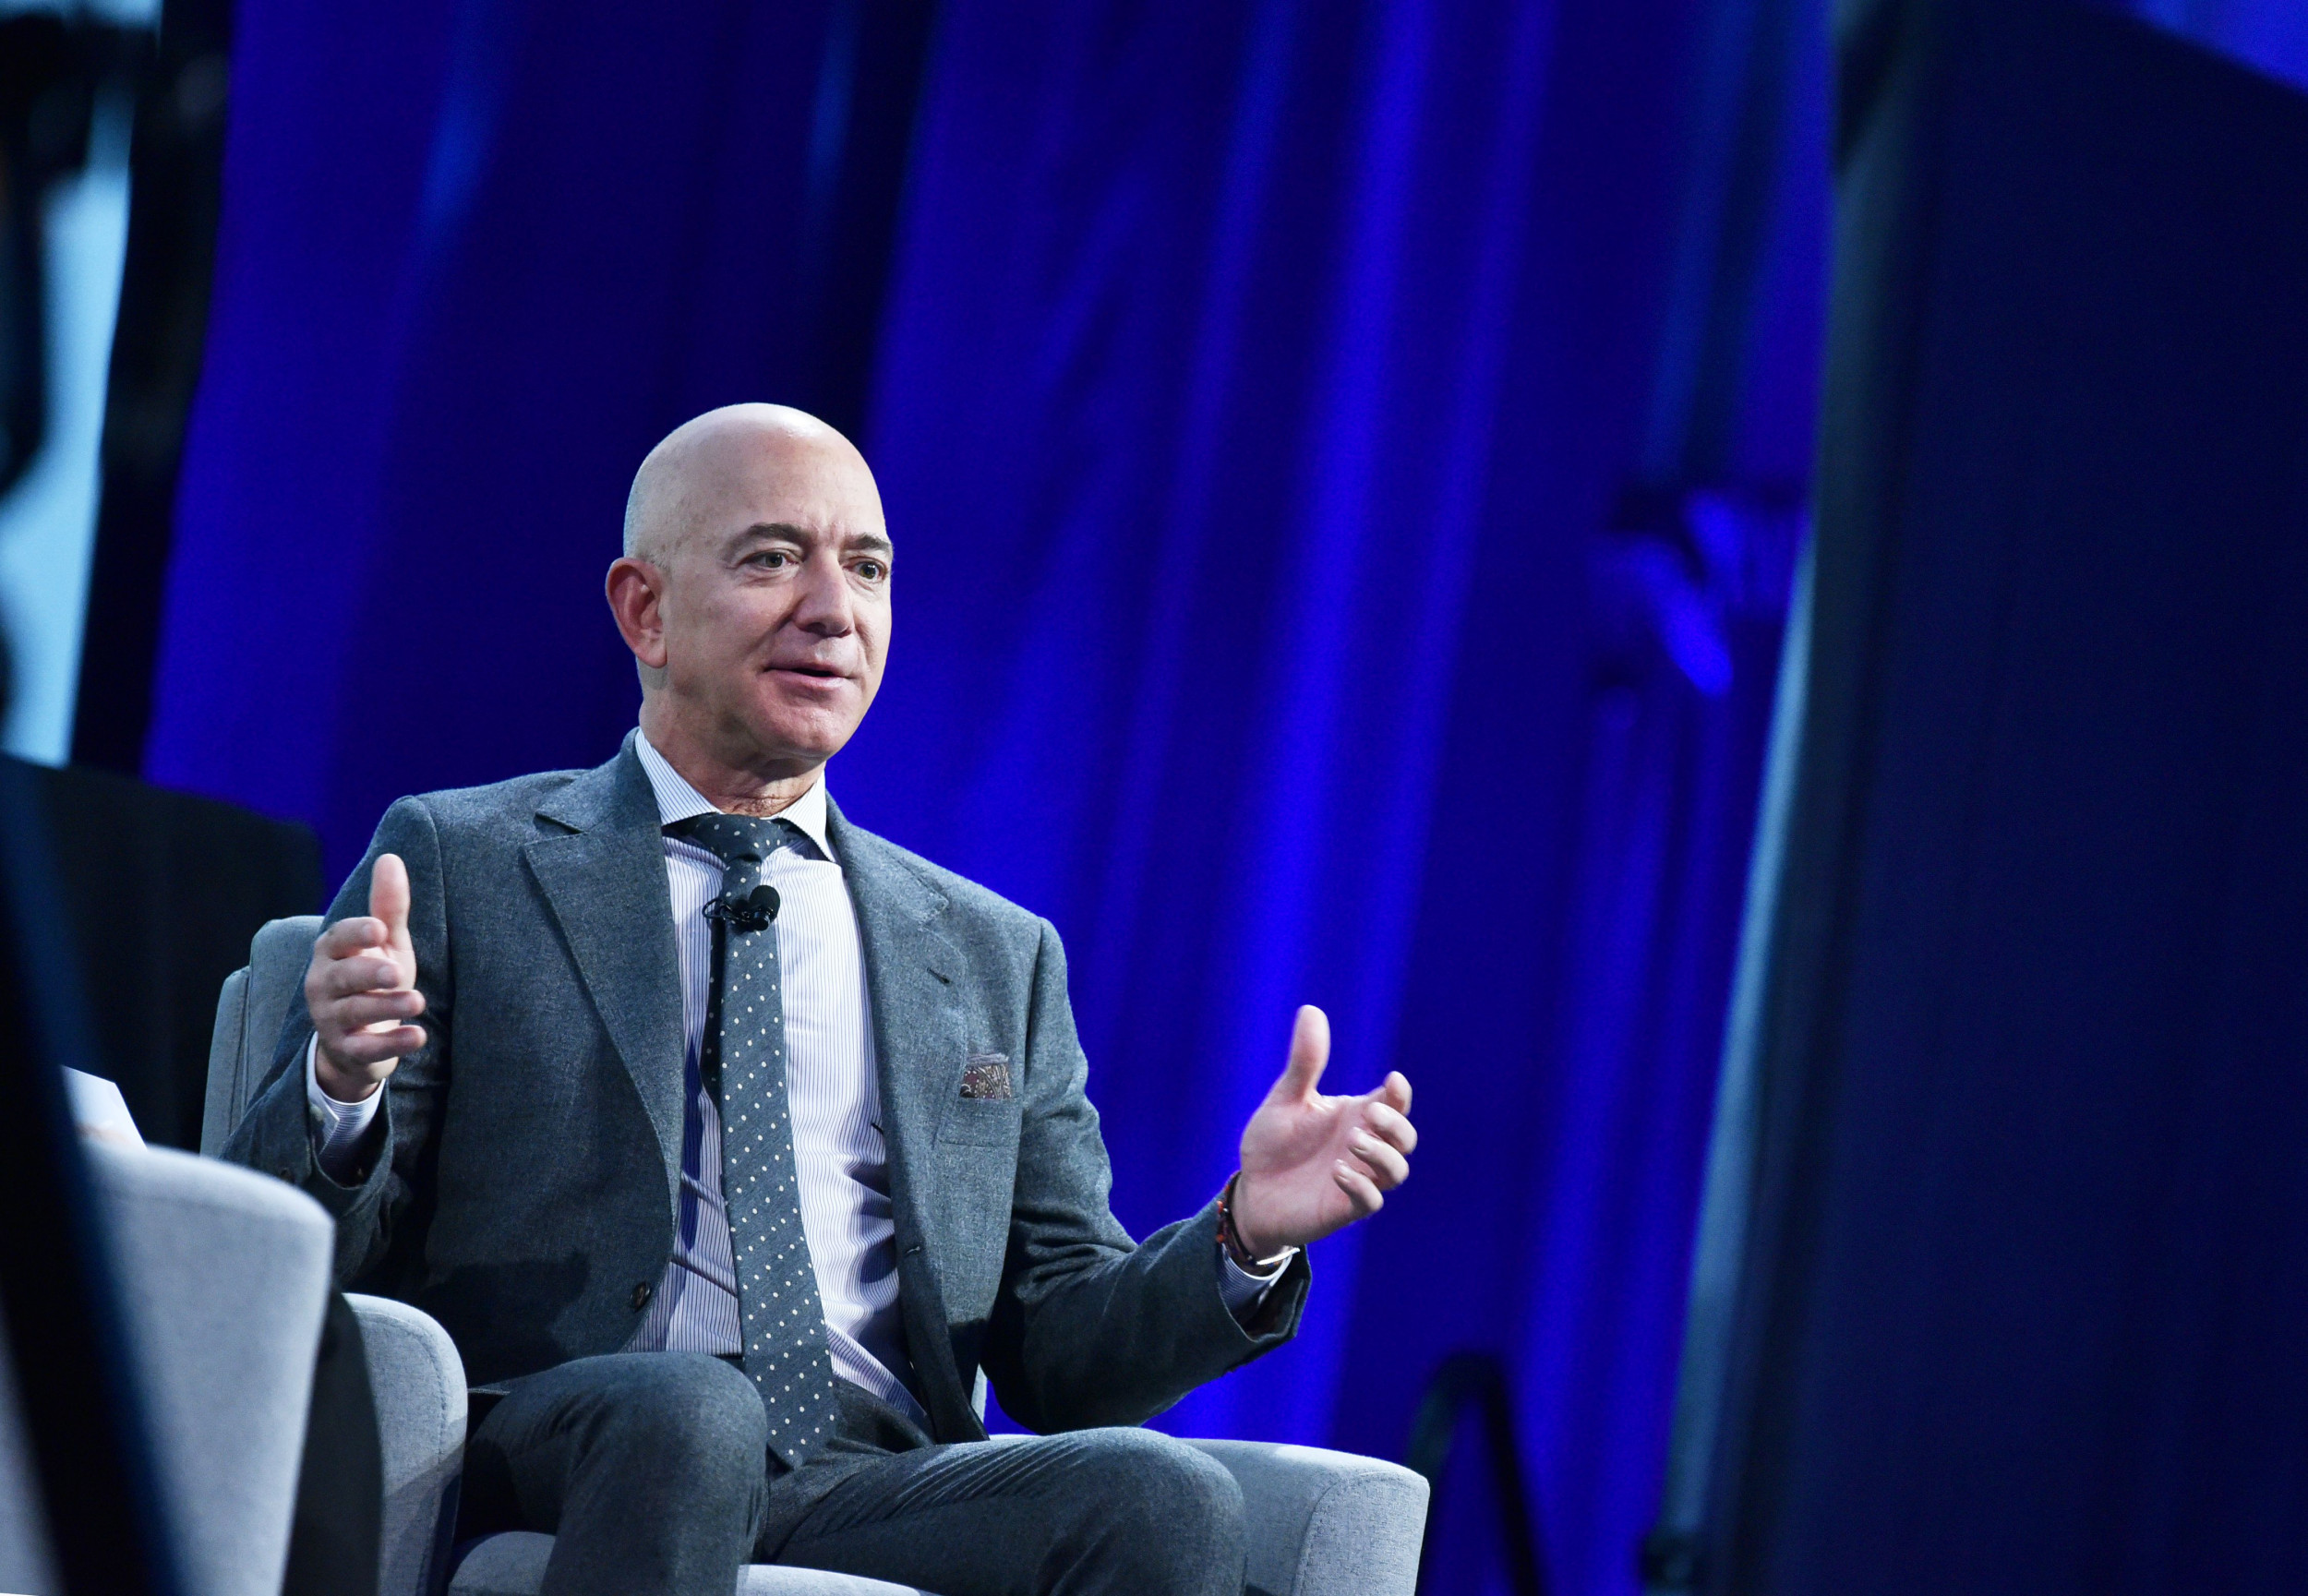 Jeff Bezos to Step Down as Amazon CEO After Company's Sales Grew $38 Billion In One Year